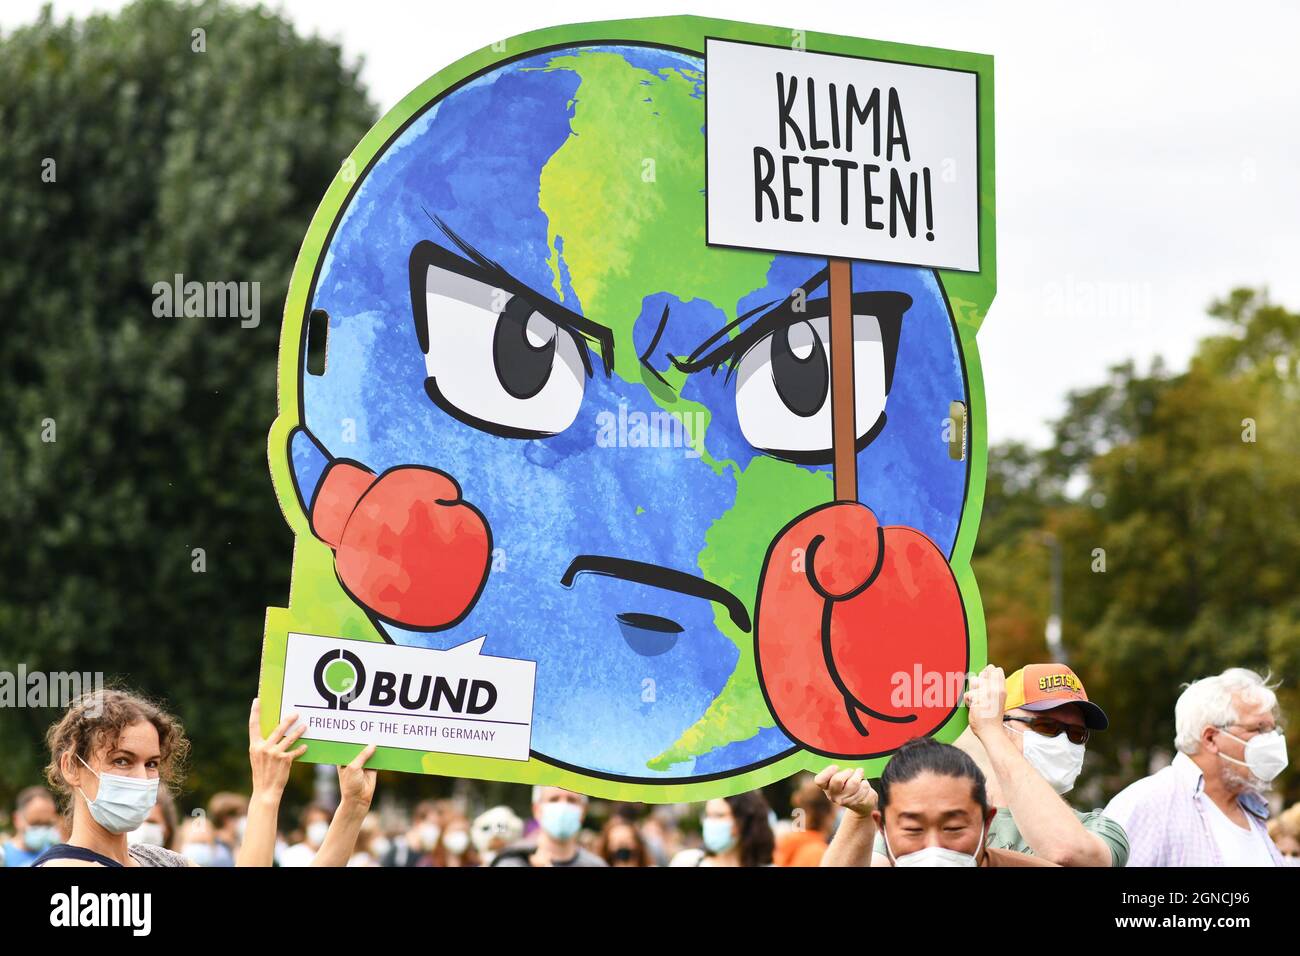 Heidelberg, Germany - 24th September 2021: Protest sign with angry earth of organization dedicated to preserving nature and environment called BUND at Stock Photo